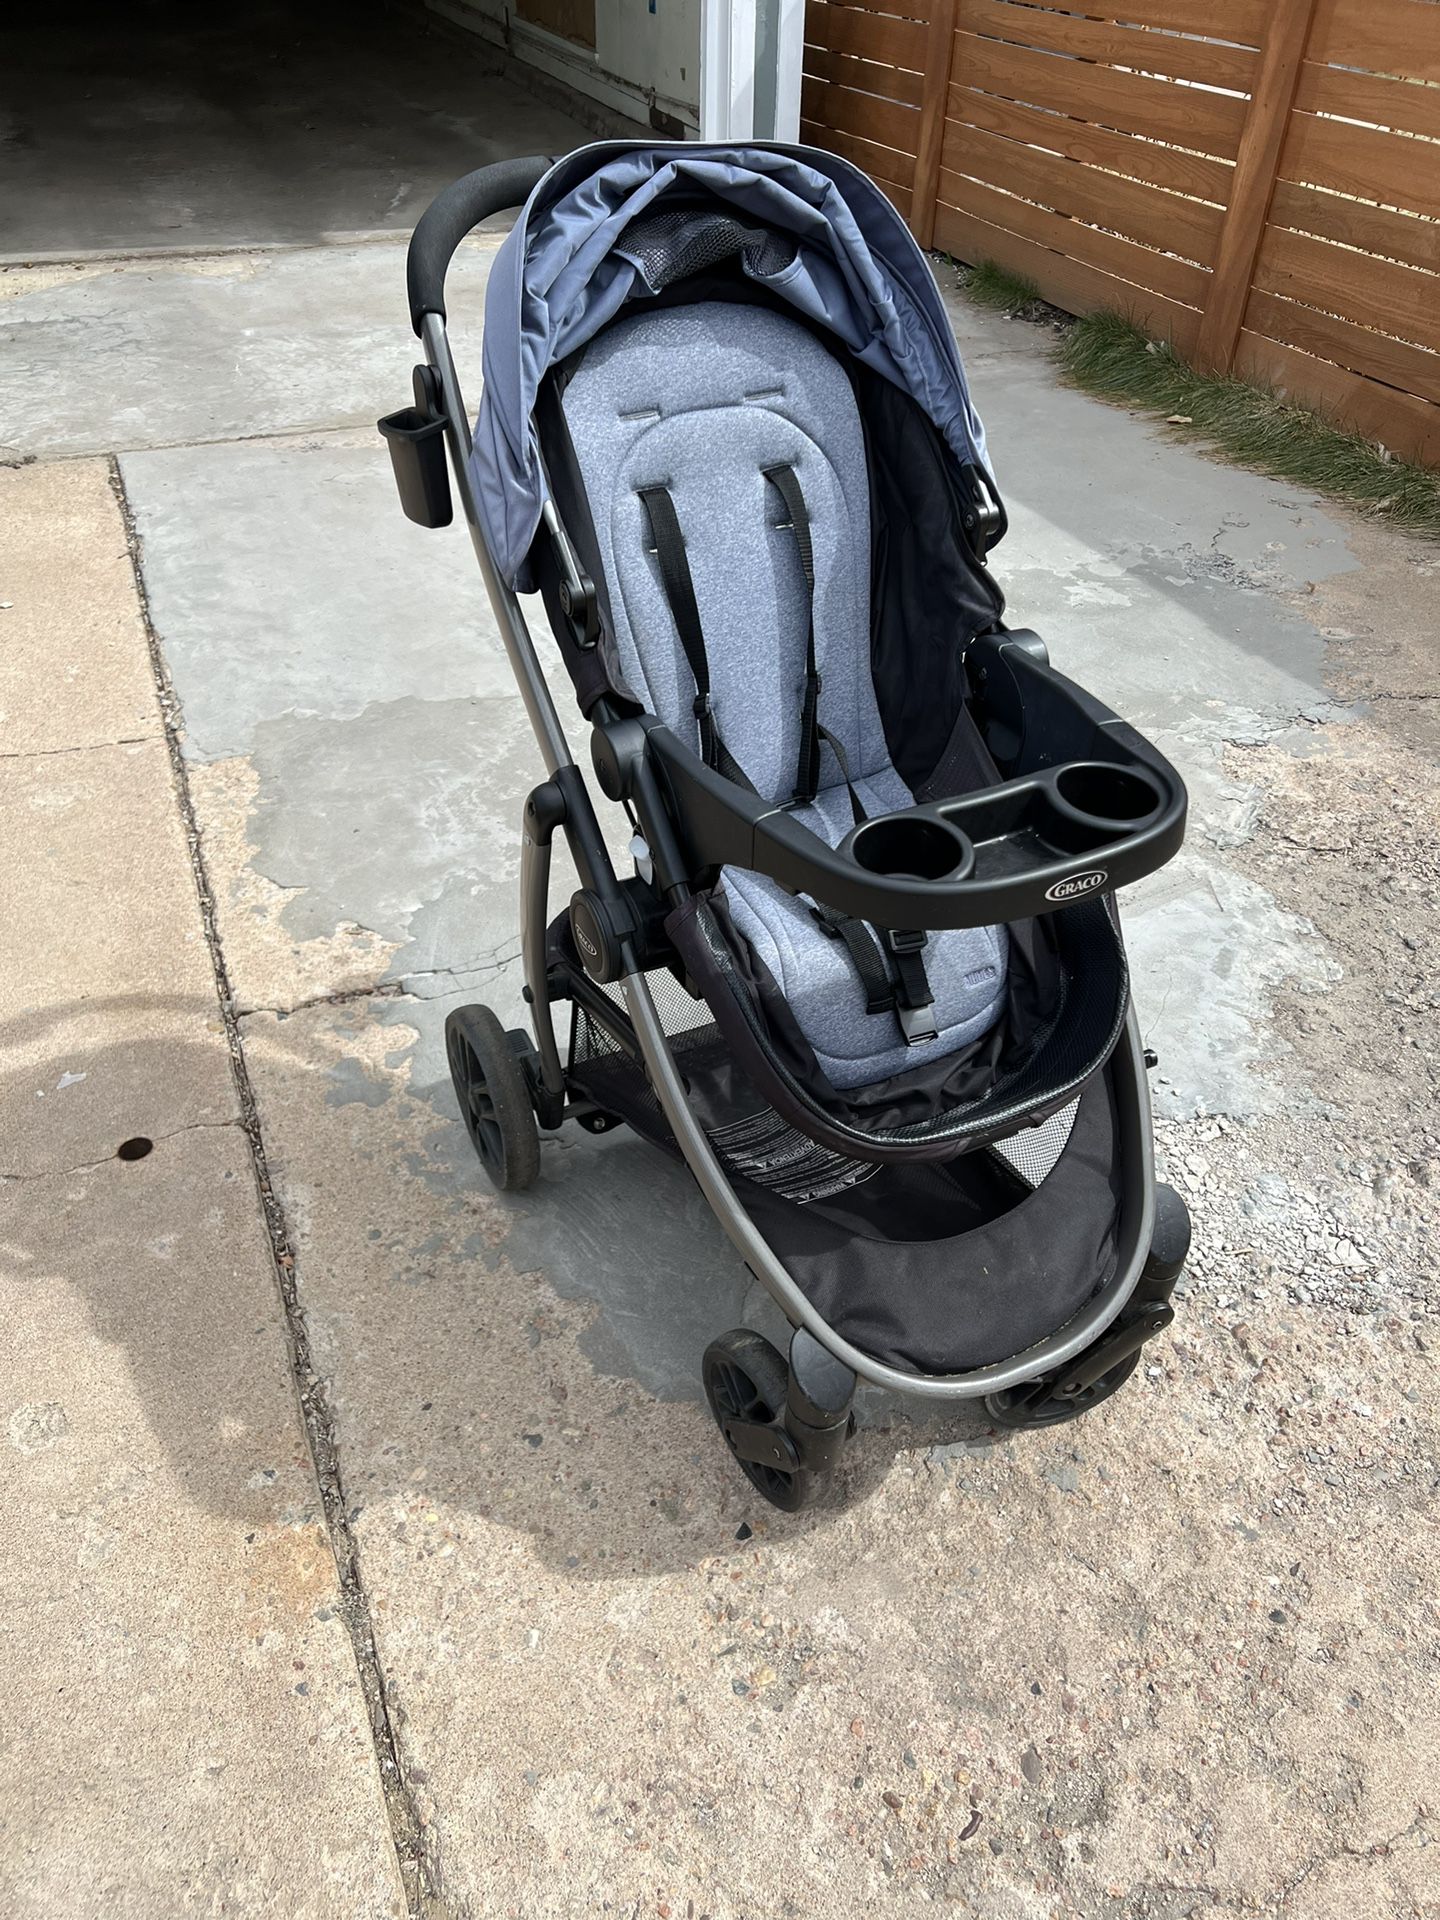 Graco Modes Pramette Stroller And Car Seat Combo